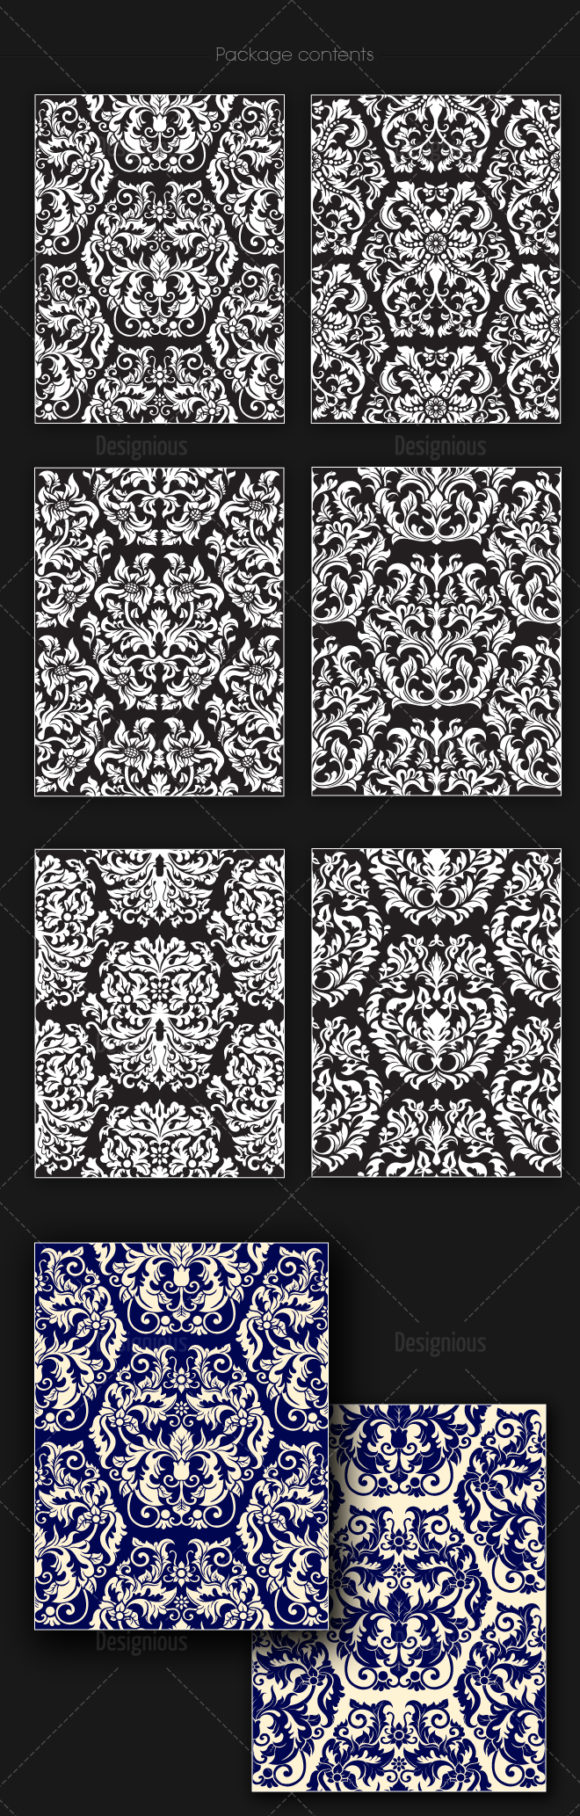 Seamless Patterns Vector Pack 149 2